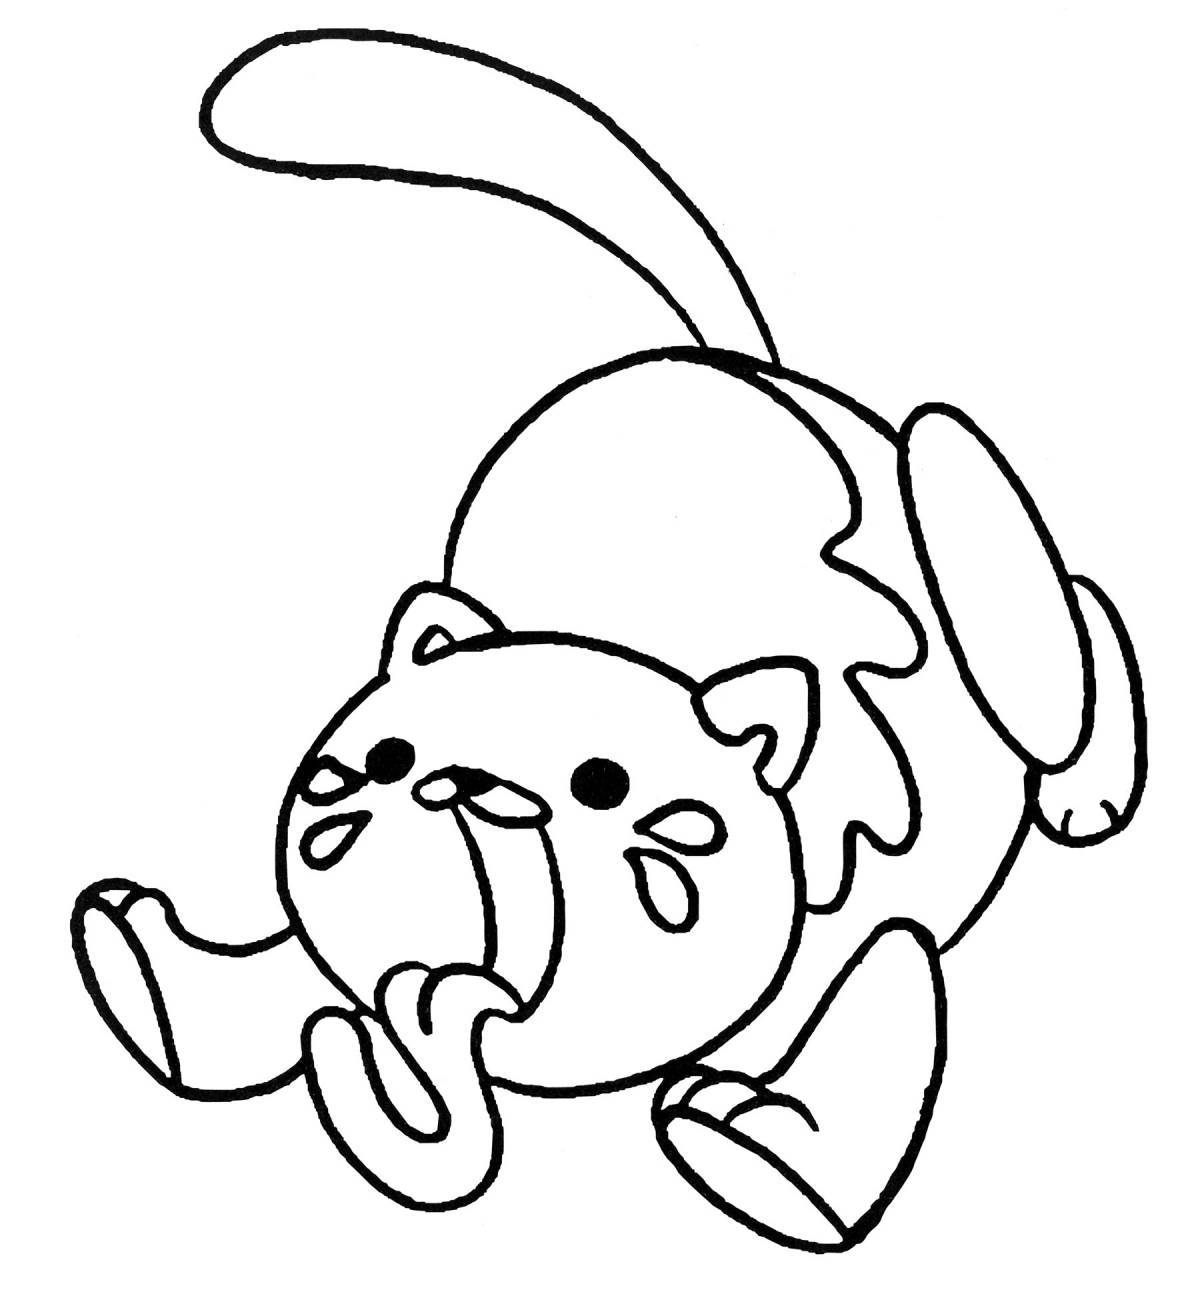 Coloring page cute pug caterpillar